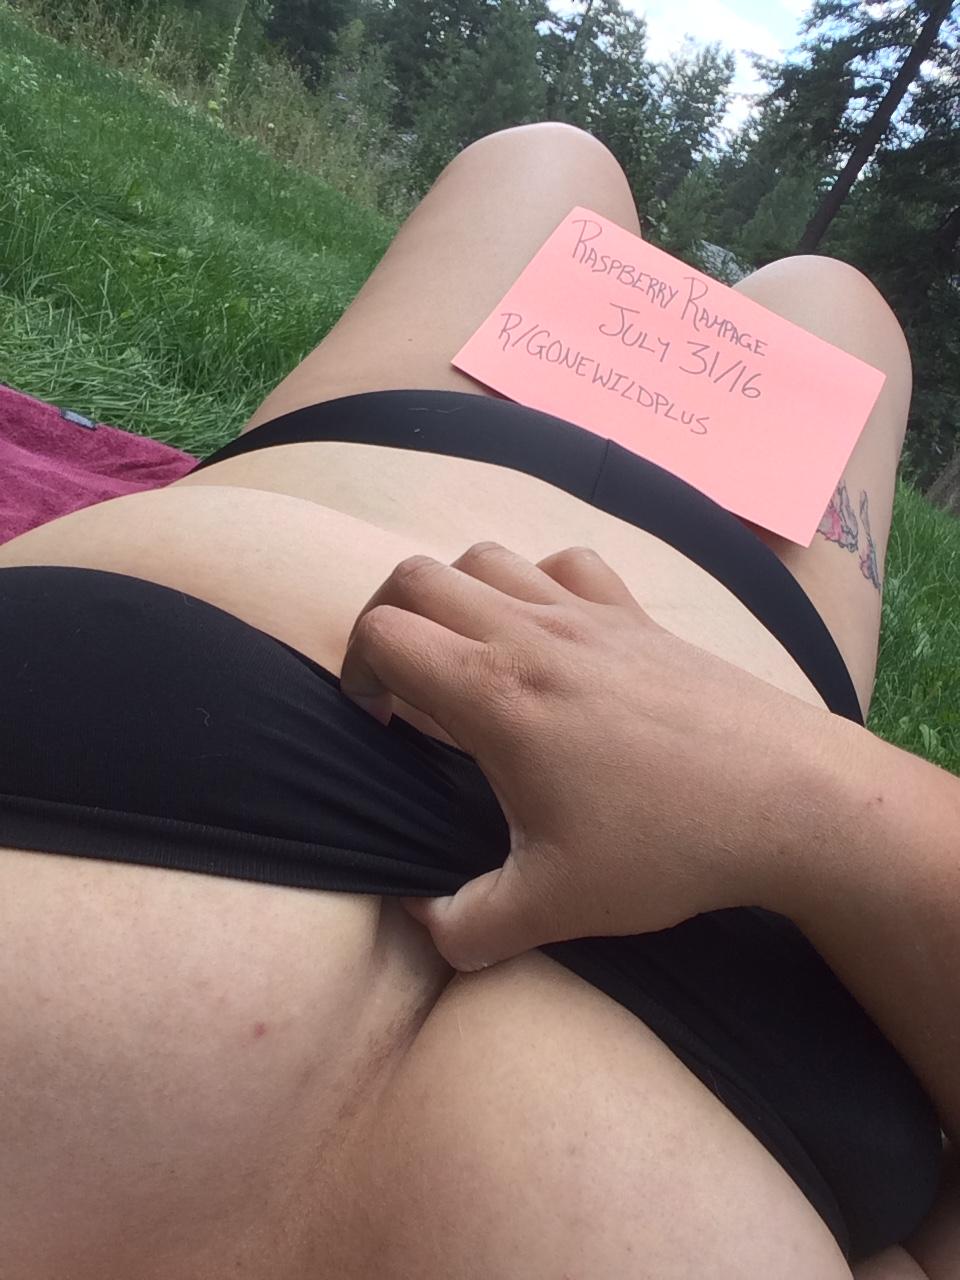 [f] Verification shenanigans in the sun.